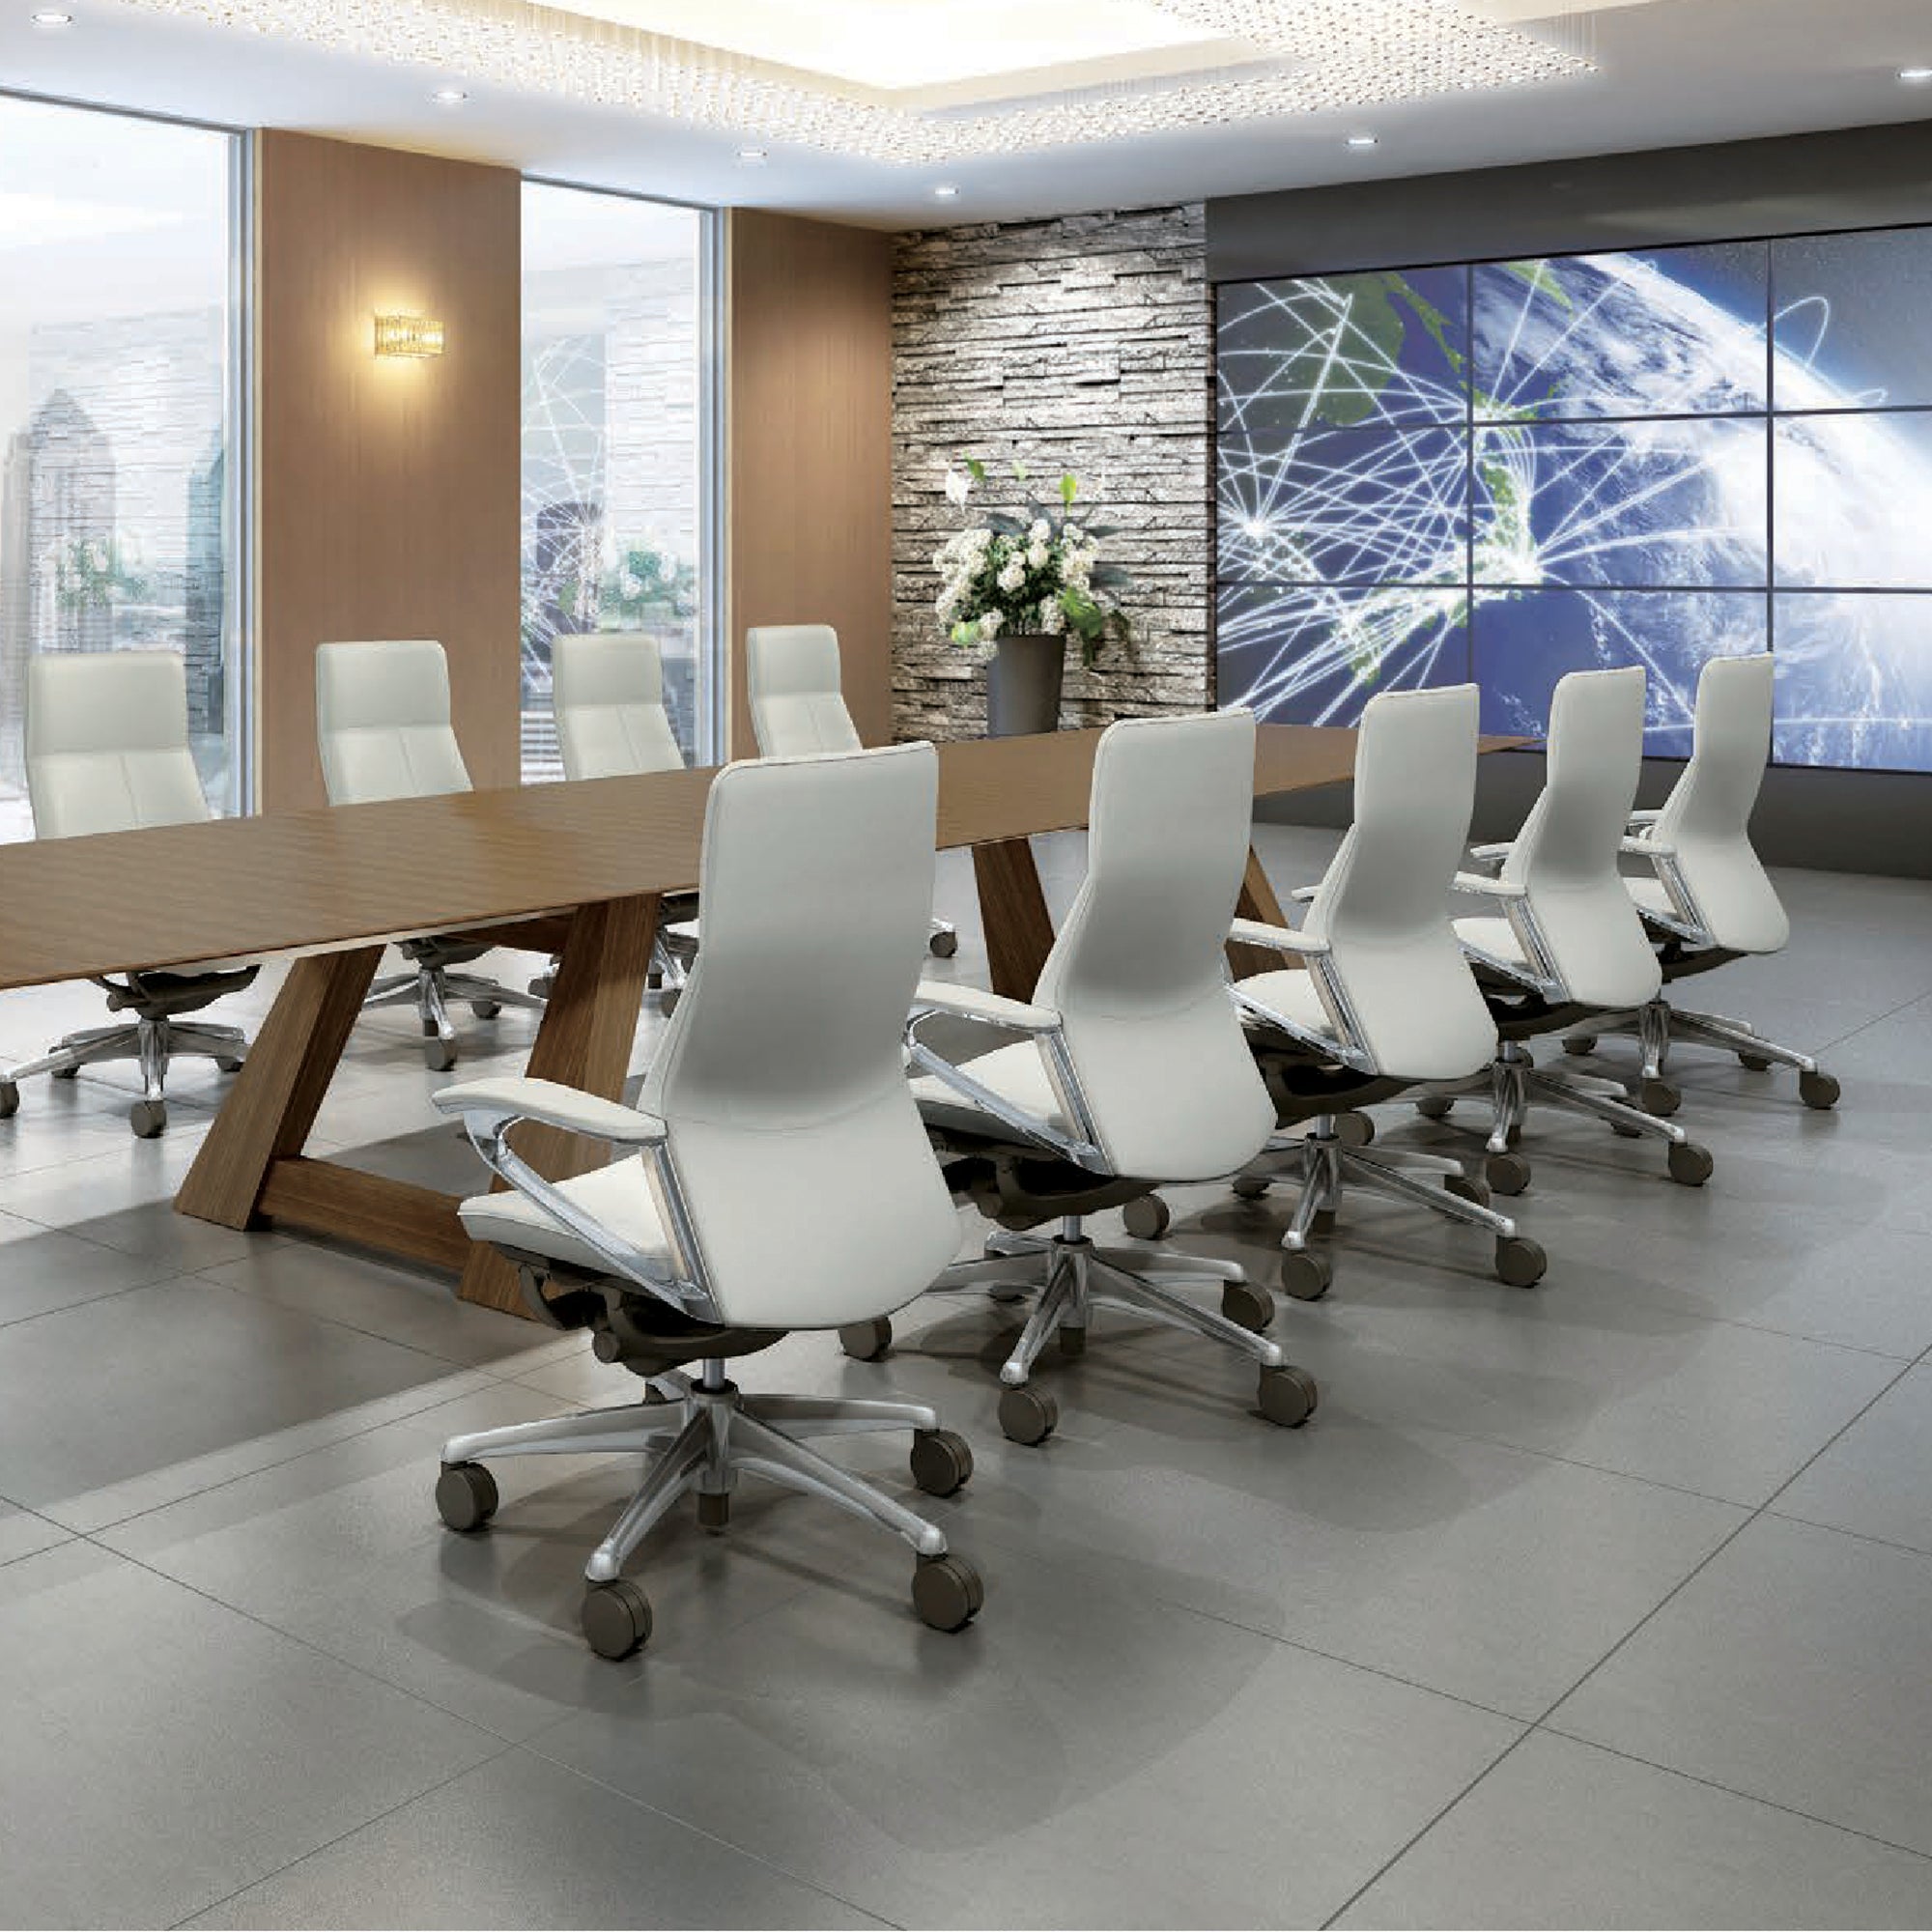 leather chair in conference room